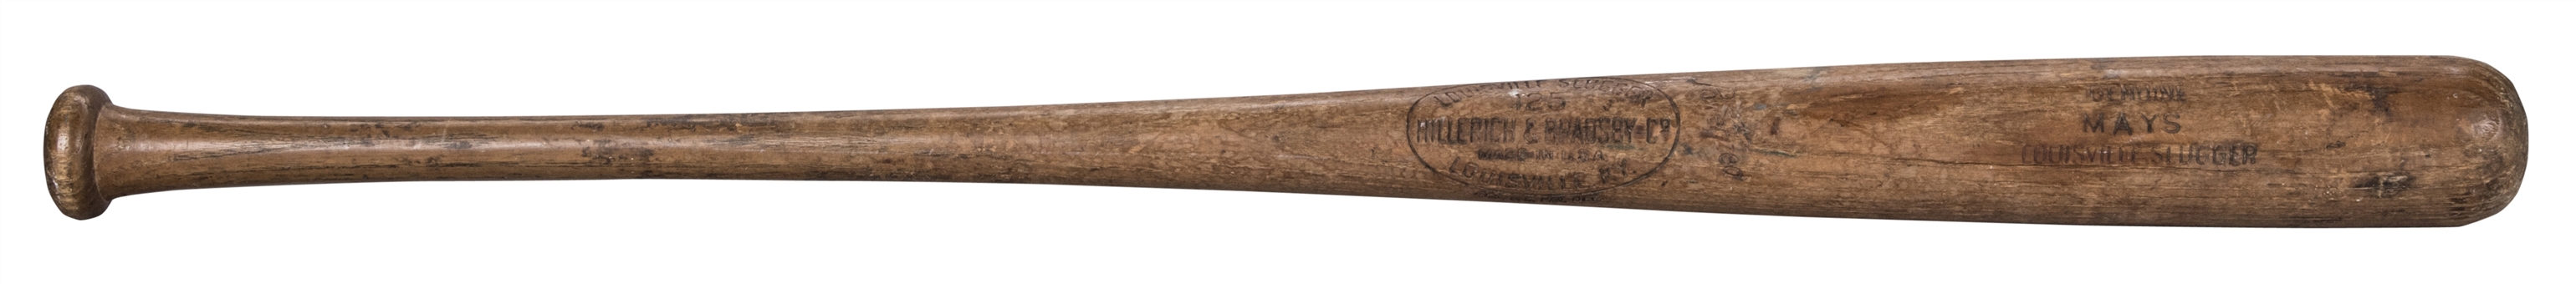 1964 Willie Mays Game Used Hillerich & Bradsby S2 Model Bat (PSA/DNA)